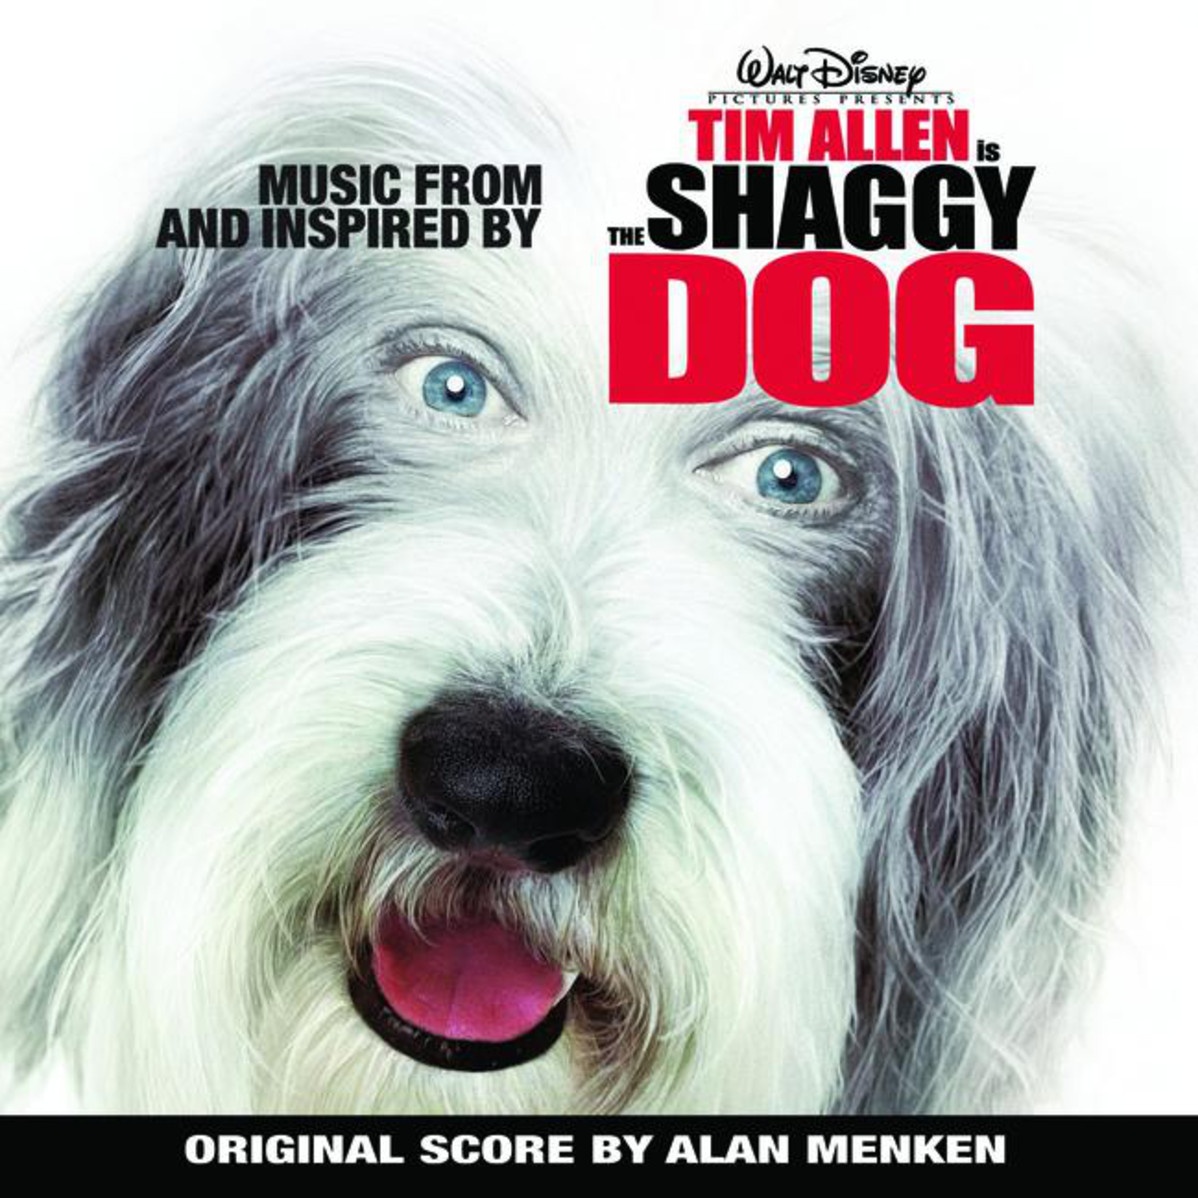 The Shaggy Dog (Music From and Inspired By)